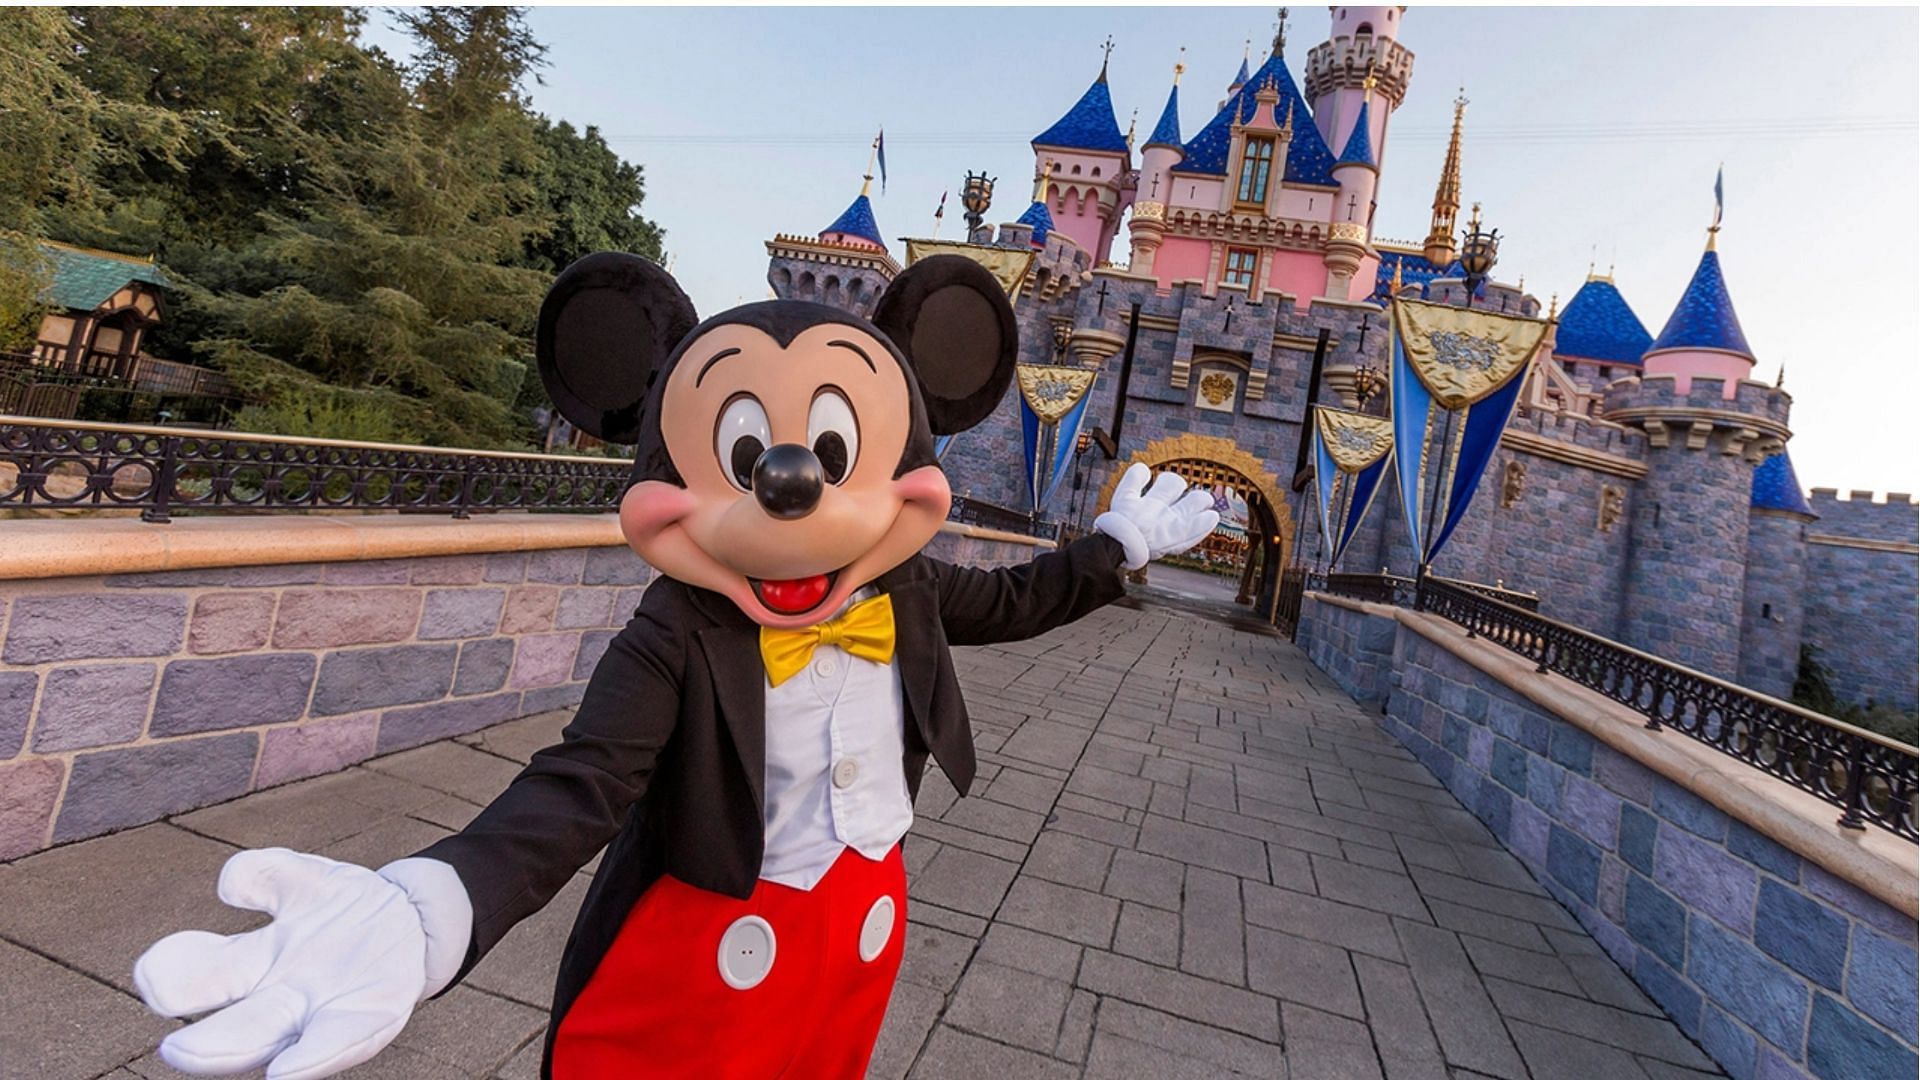 a Mickey Mouse welcomes people to the Disneyland (Image via Walt Disney Resorts/GettyImages)